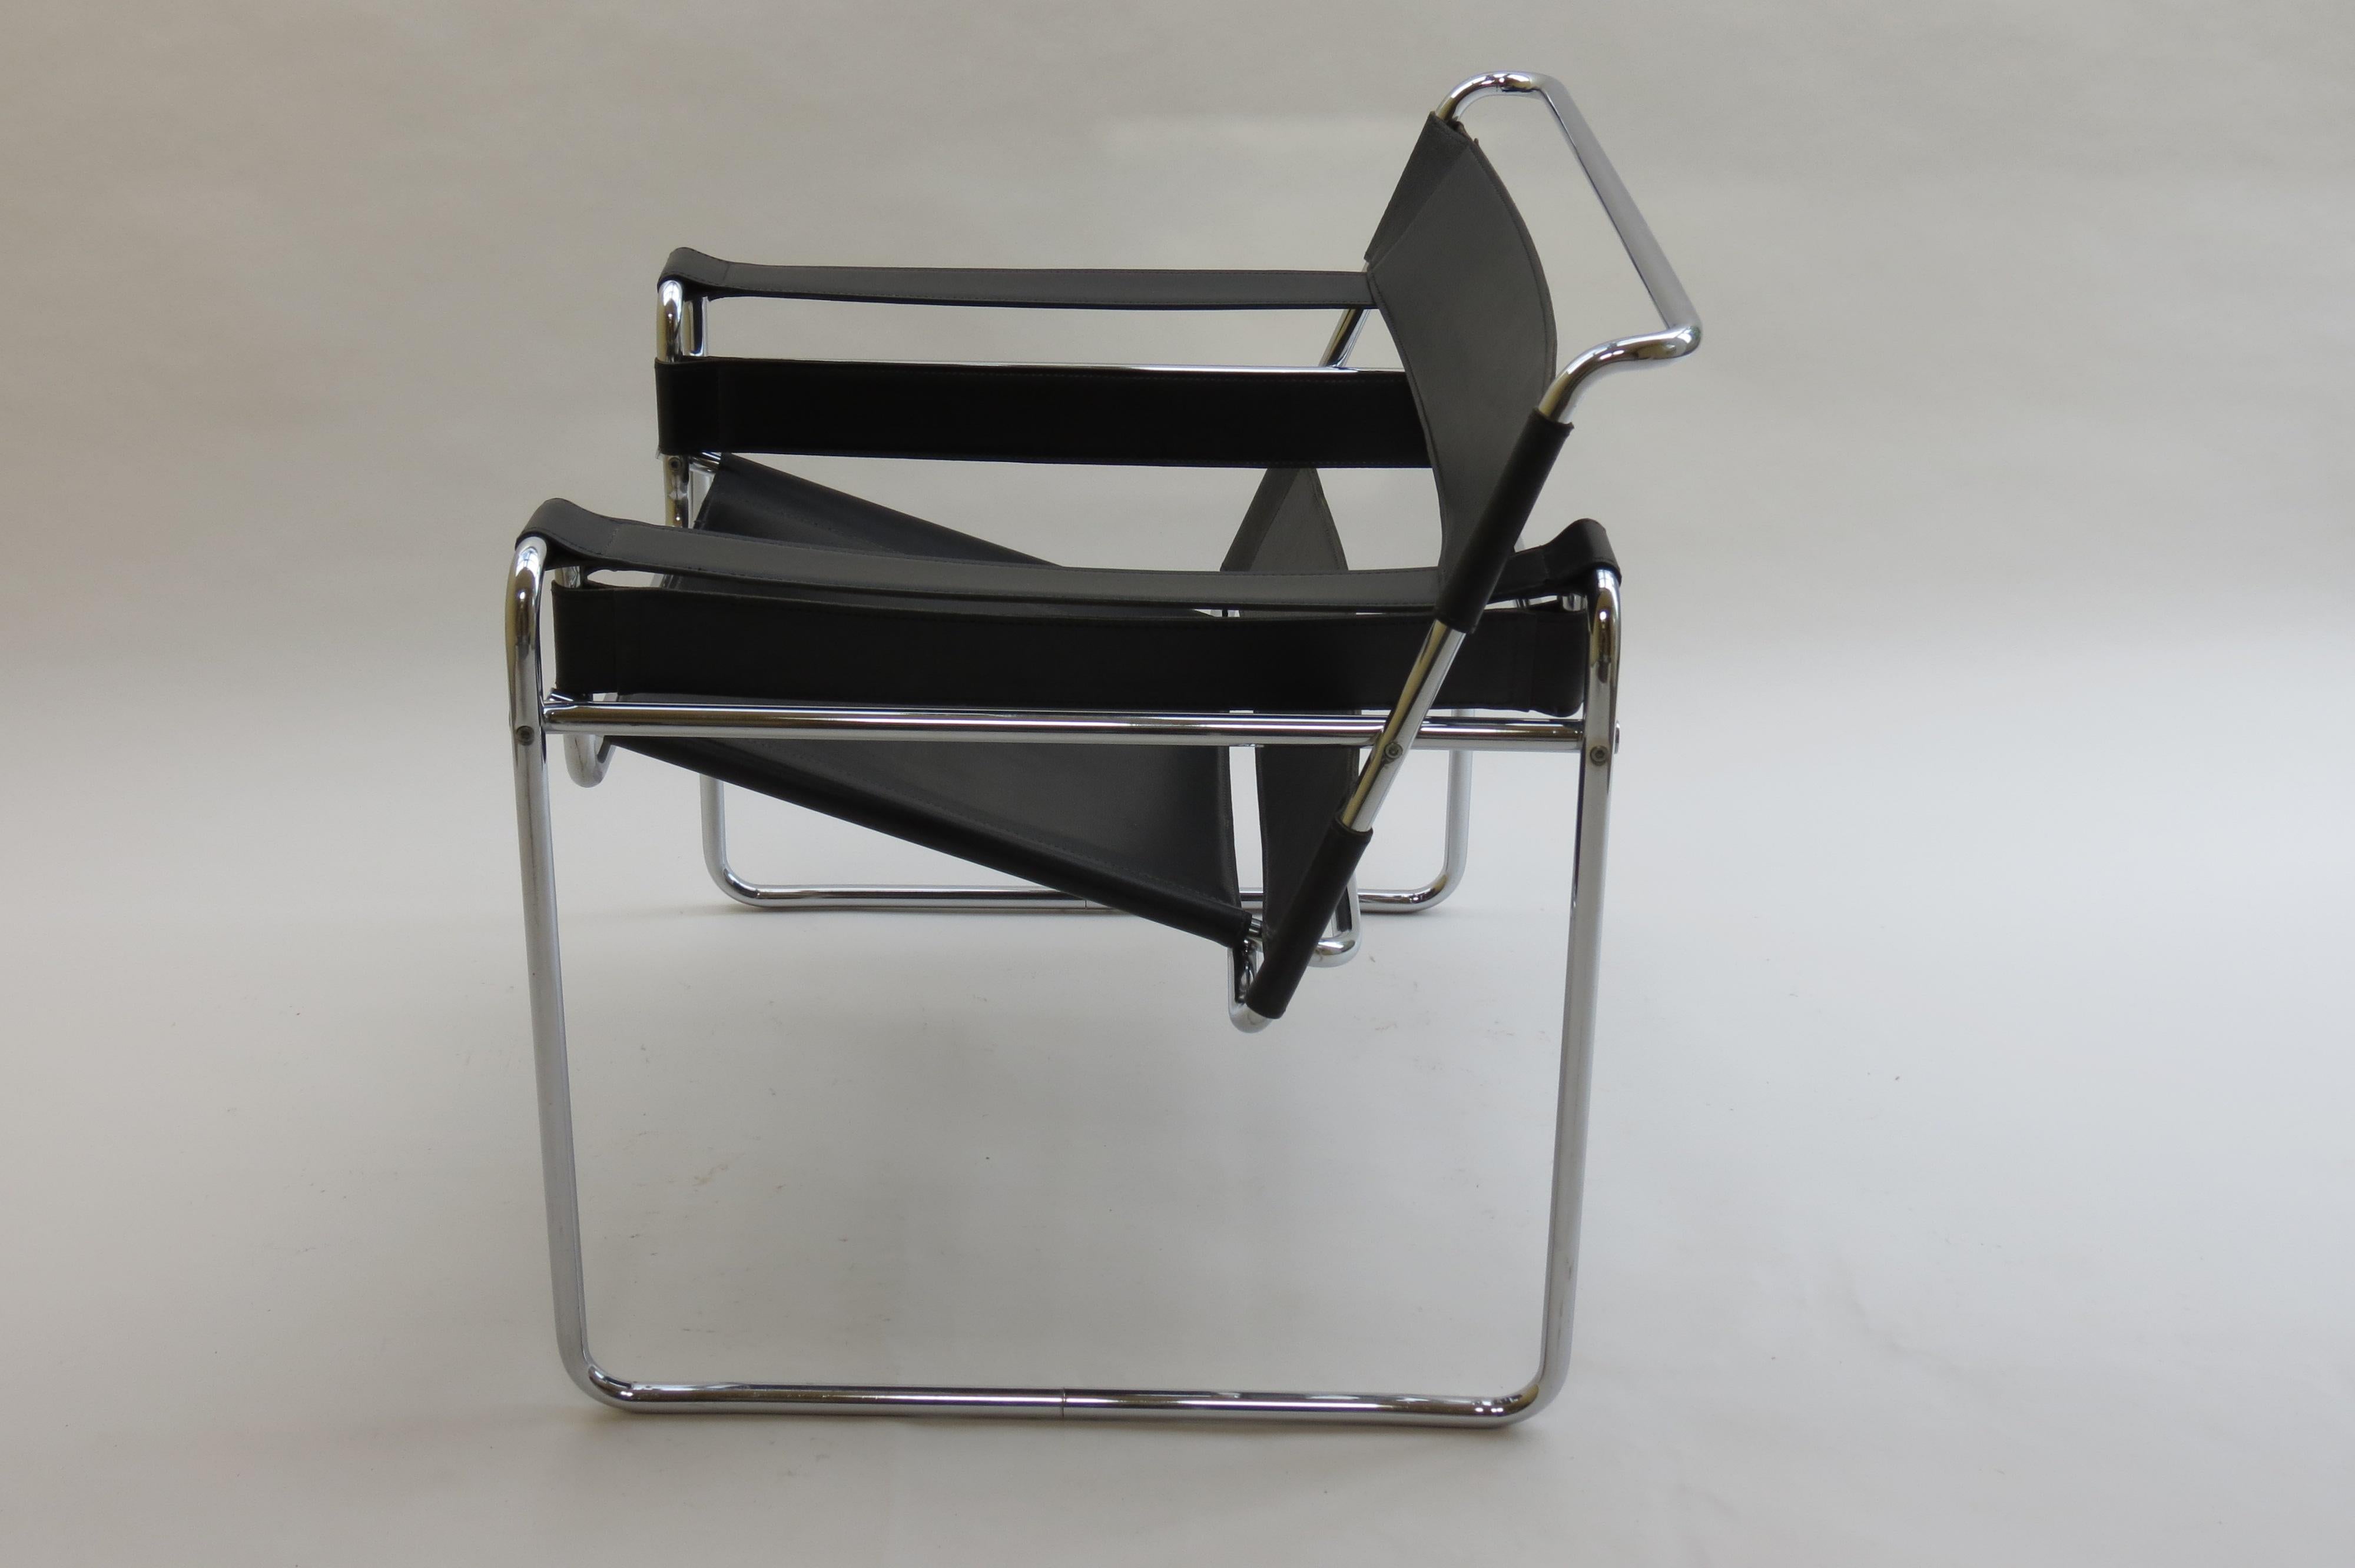 1980s Vintage Wassily B3 Black Leather and Chrome Chair Marcel Breuer 2 Avail B 5